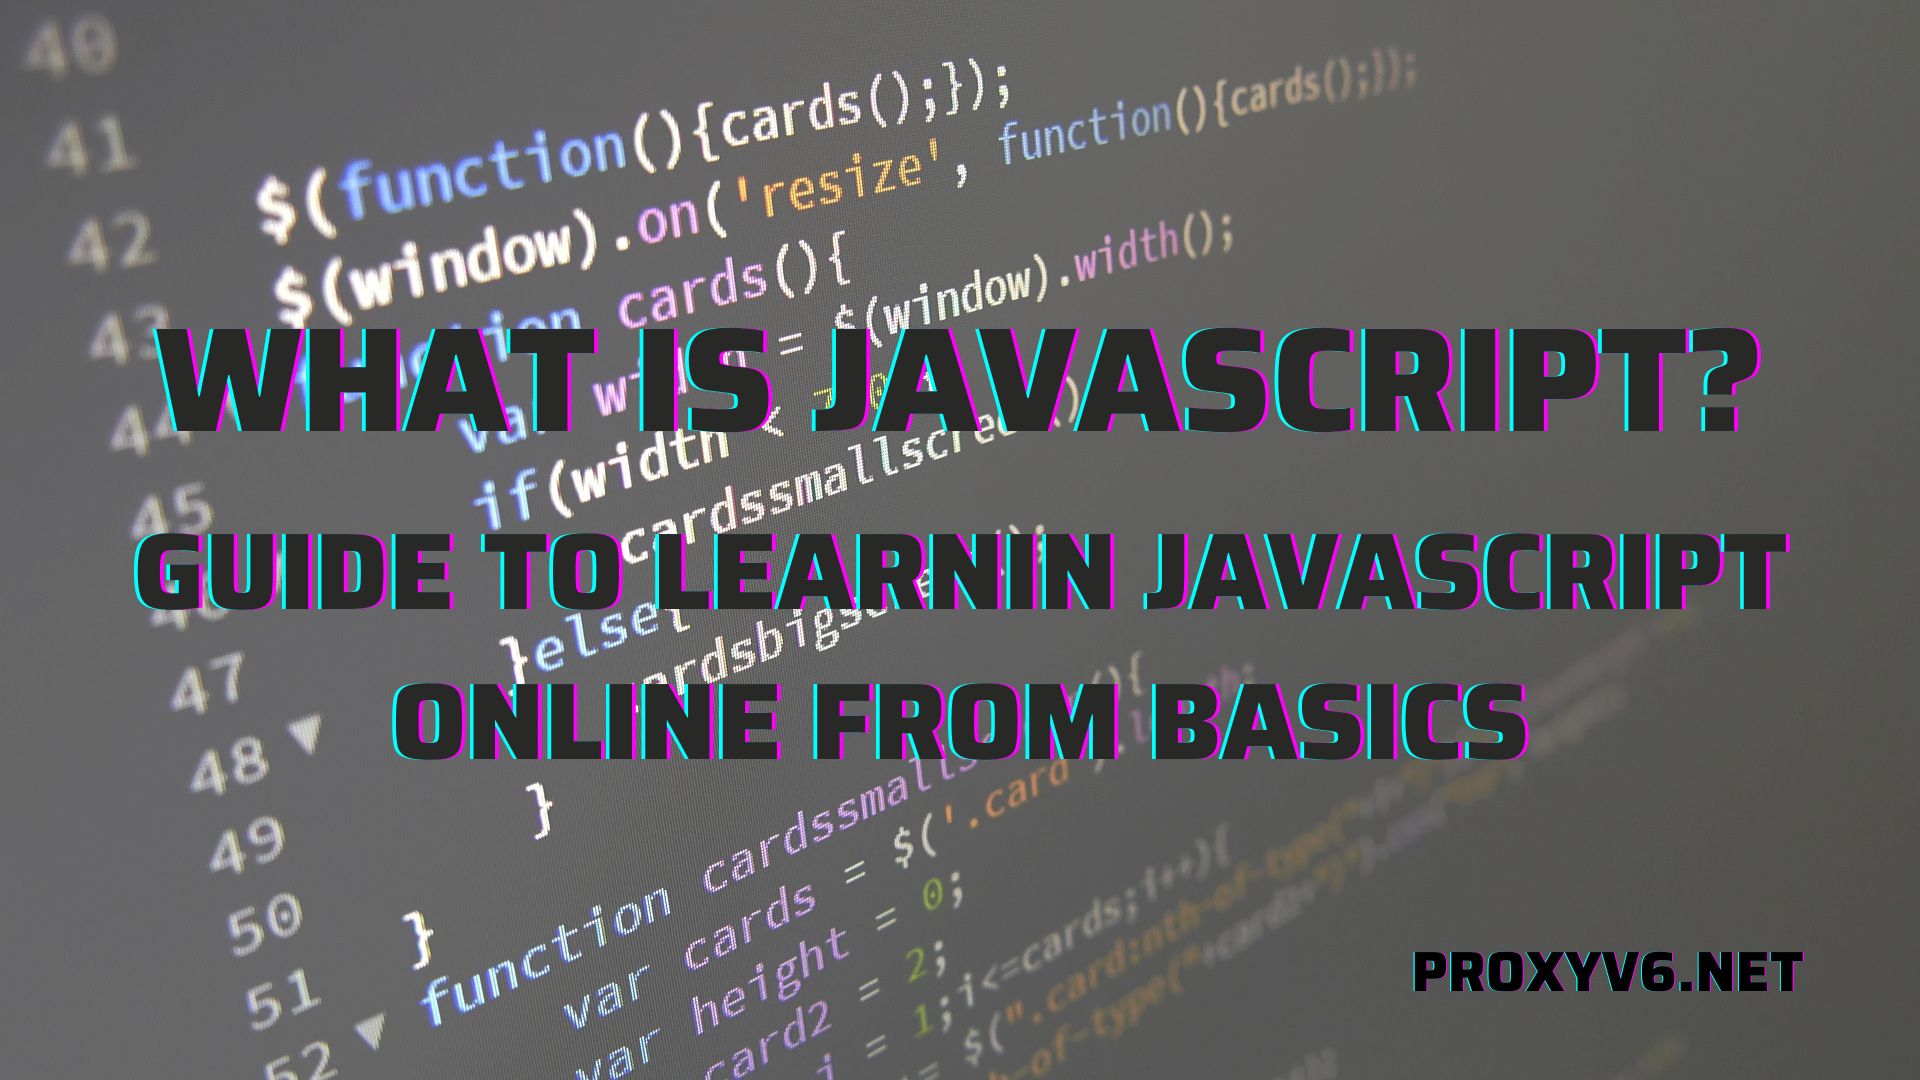 What is JavaScript? Guided to learning JavaScript online from basics